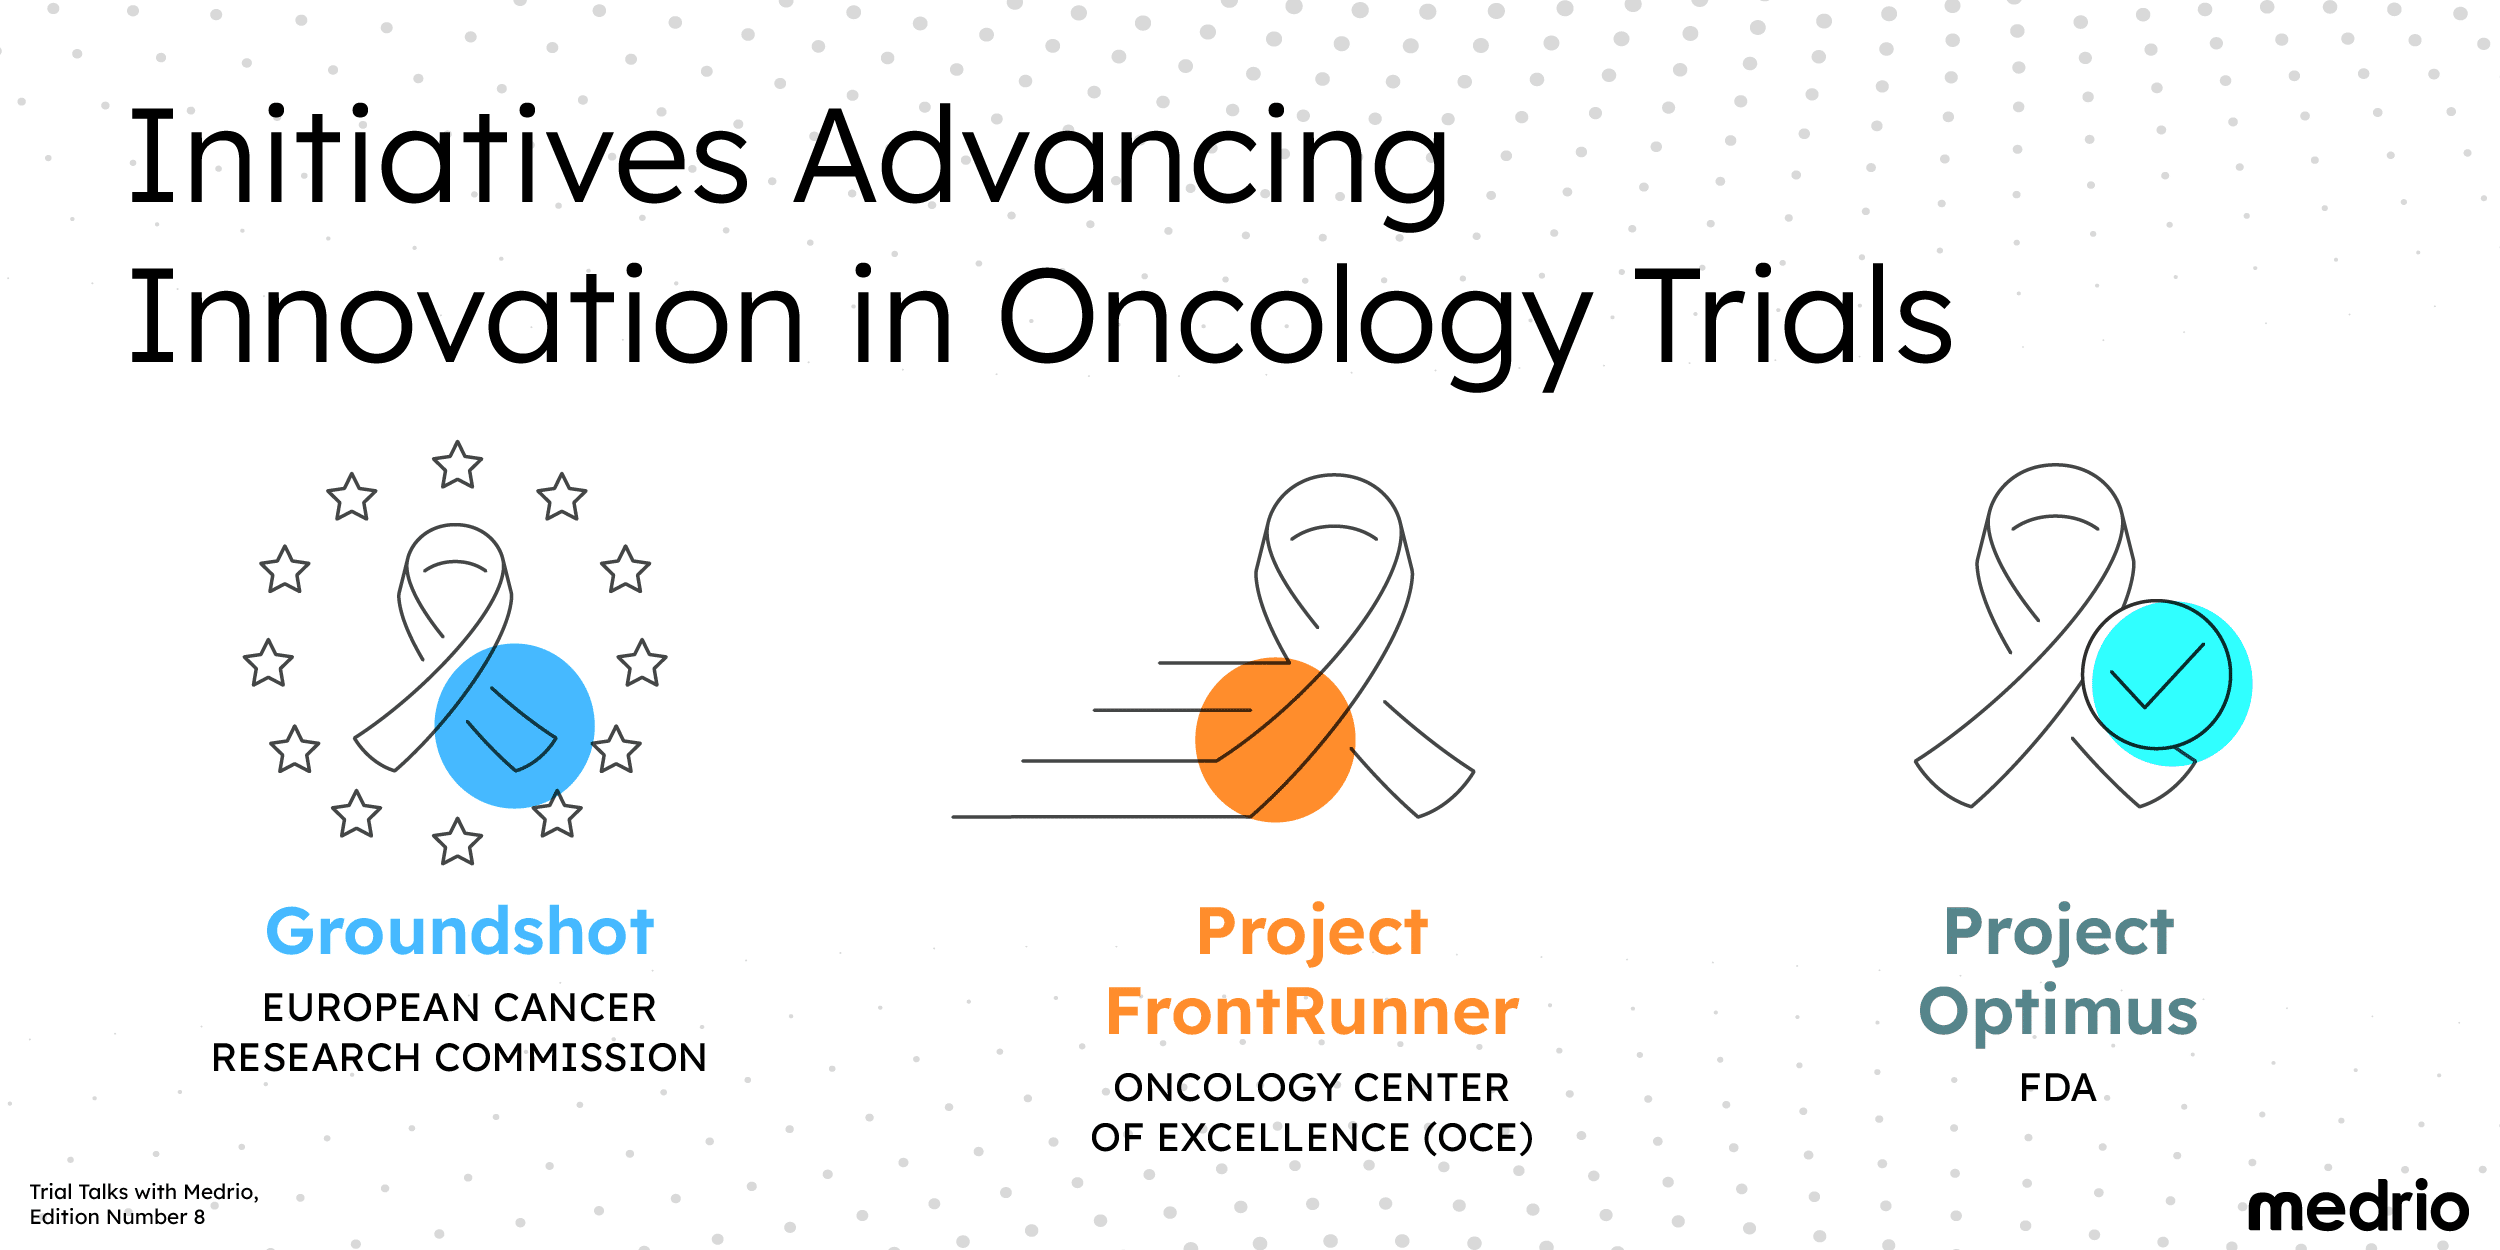 [Image] Initiatives Advancing Innovation in Oncology Trials - Groundshot, Project Frontrunner, and Project Optimus